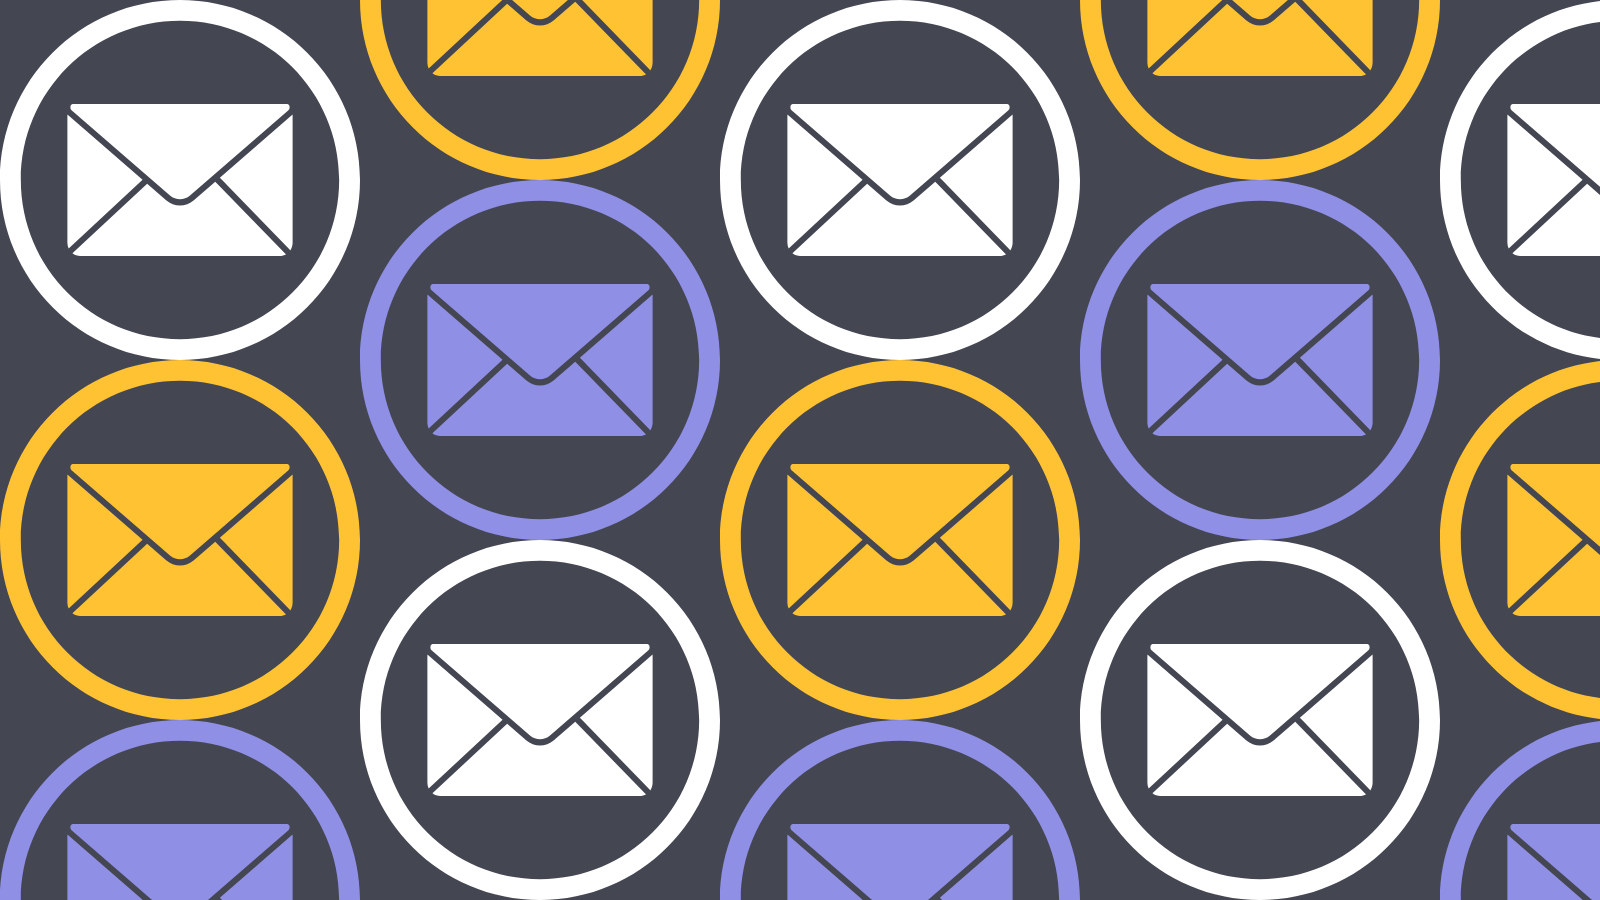 A repeating pattern of envelope icons in circles